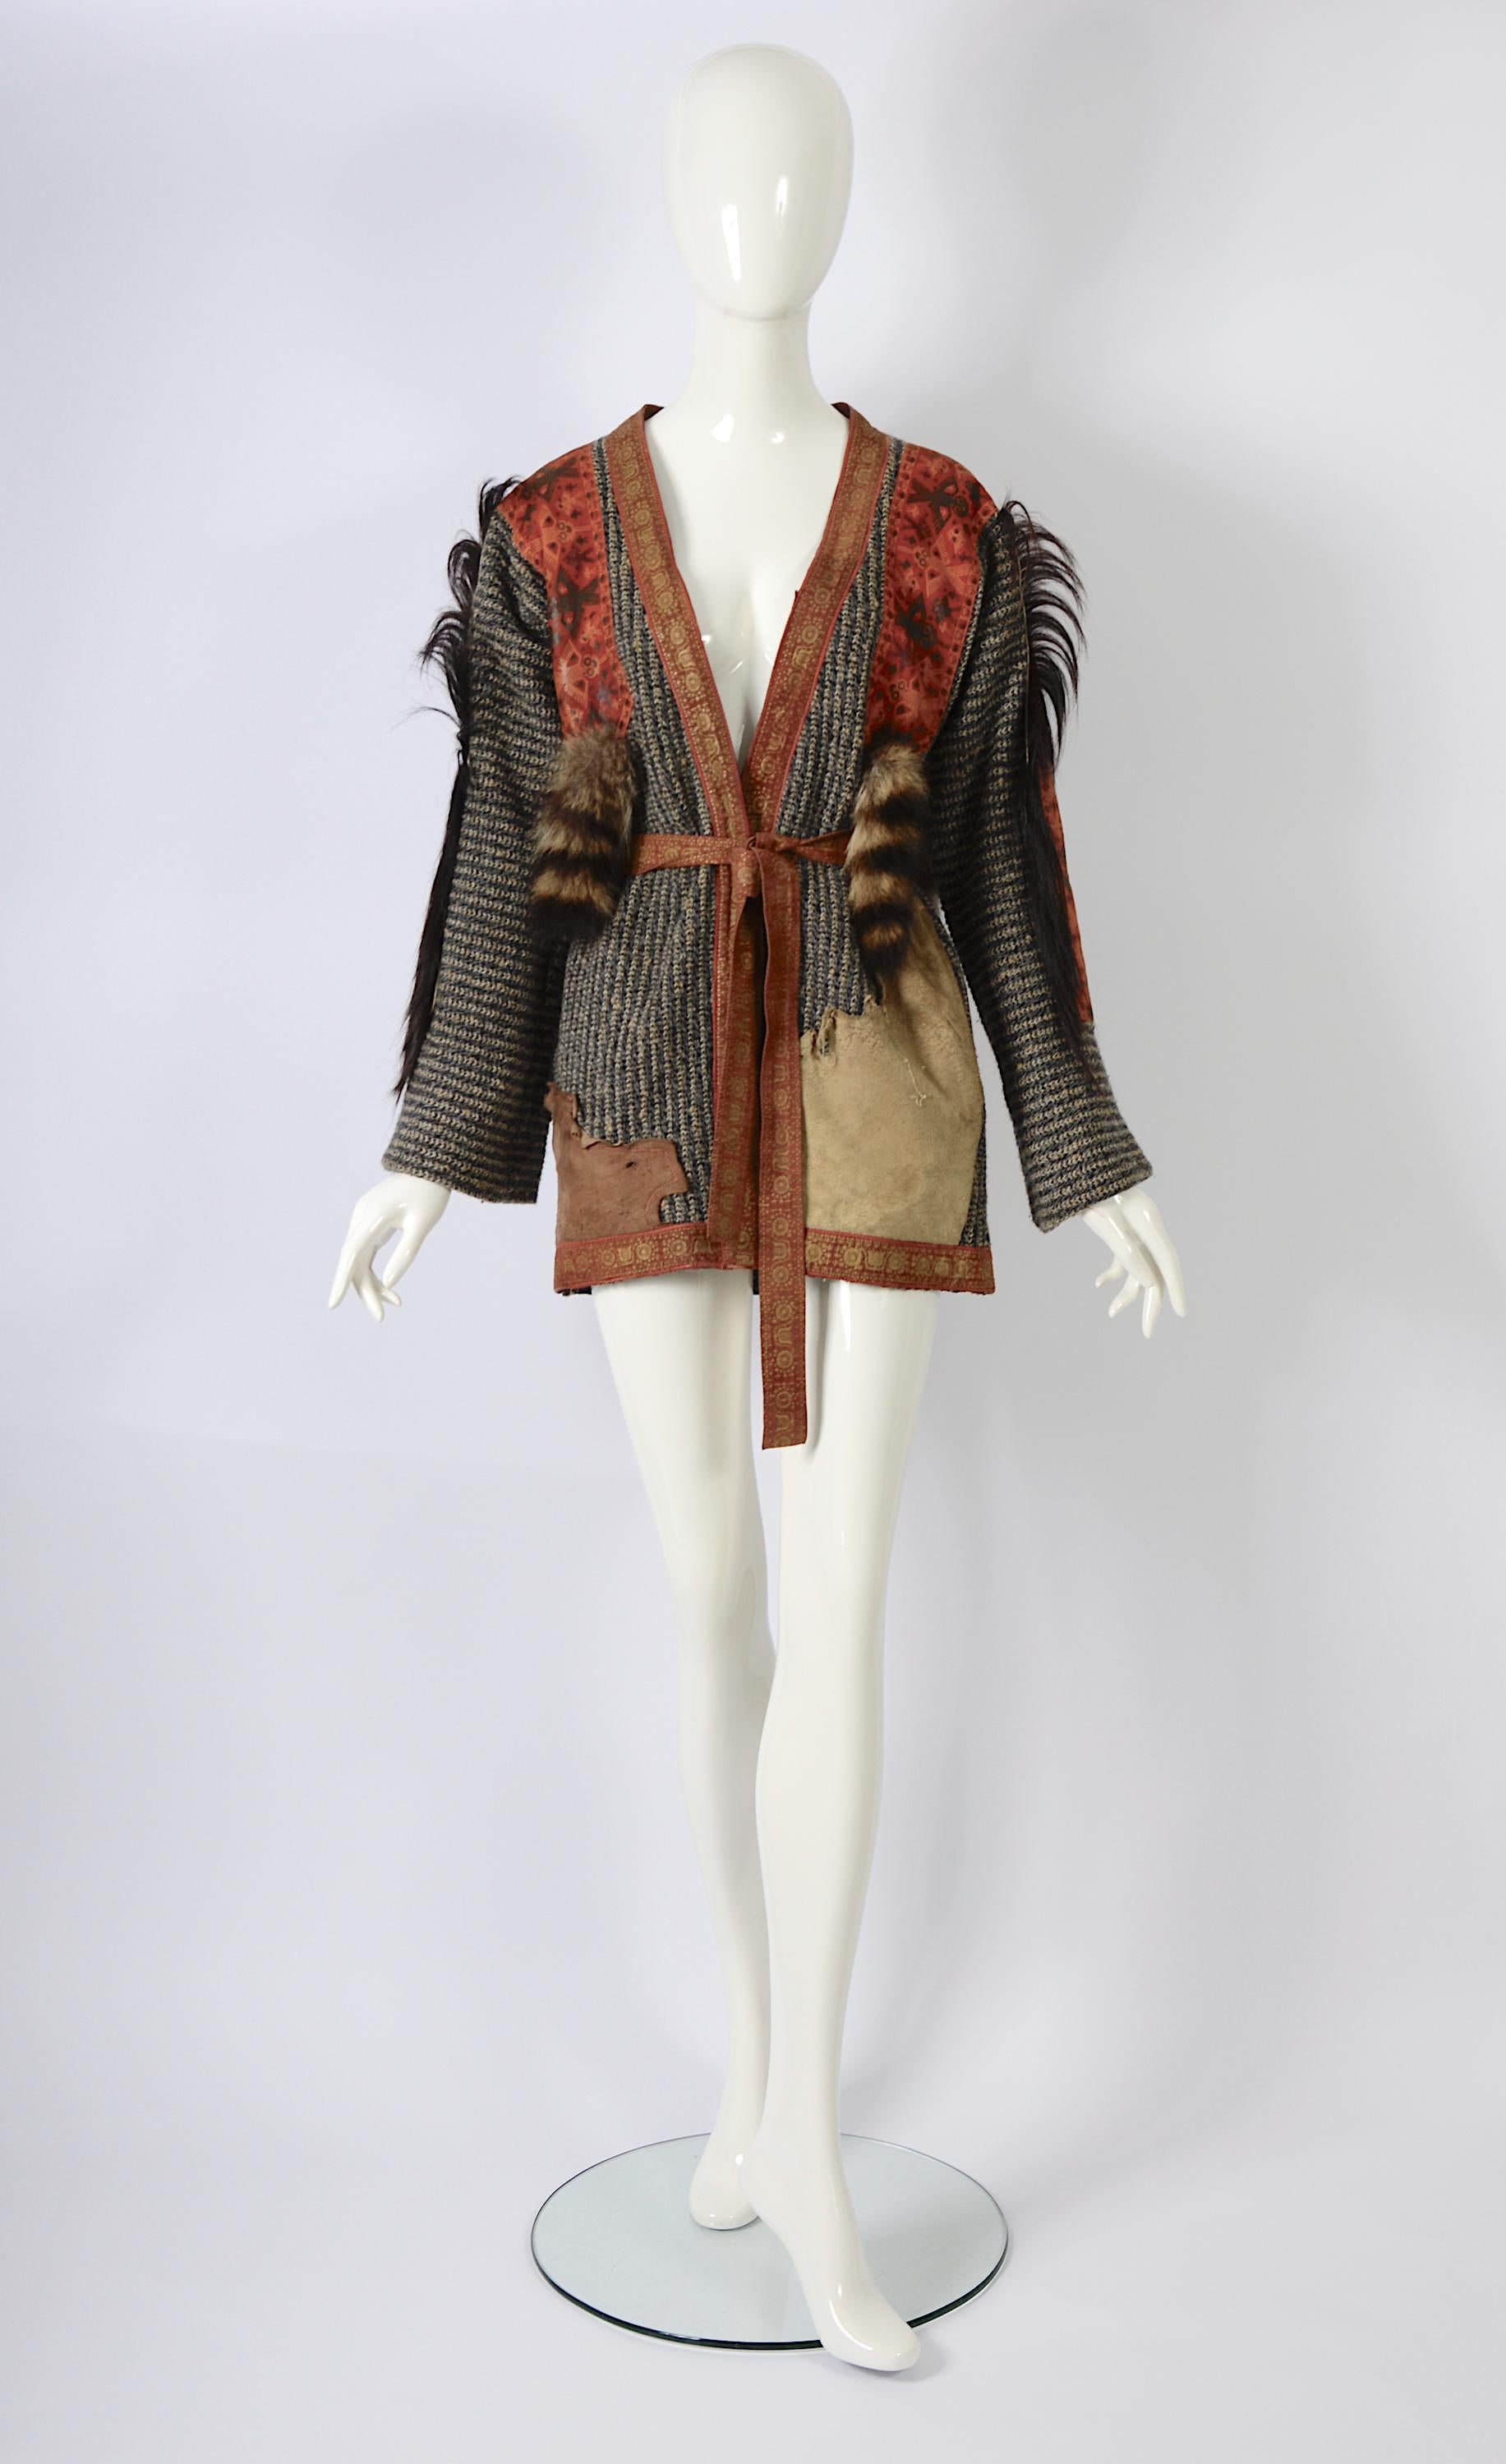 Roberto Cavalli Museum-Worthy 1971 Patchwork Debut Collection Vintage Jacket  In Good Condition For Sale In Antwerp, BE